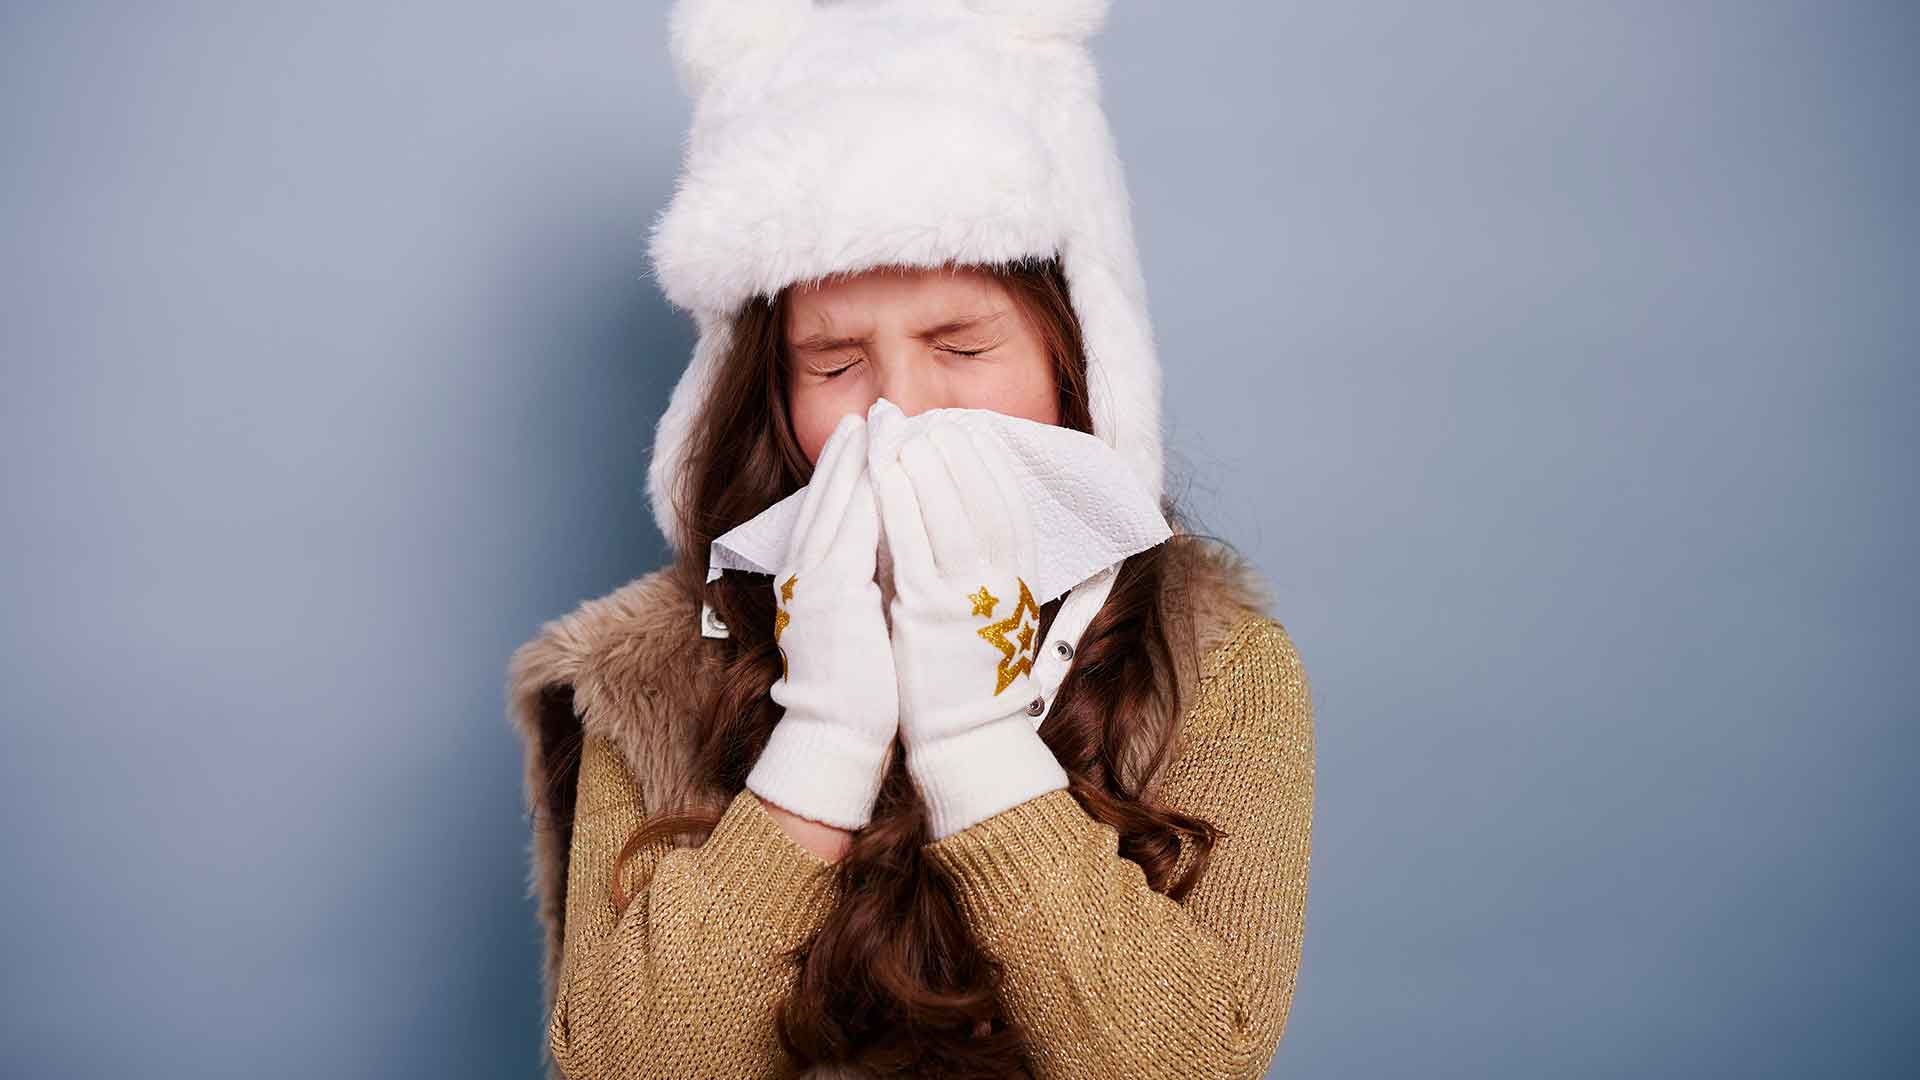 How To Keep Your Child Healthy During Cold and Flu Season